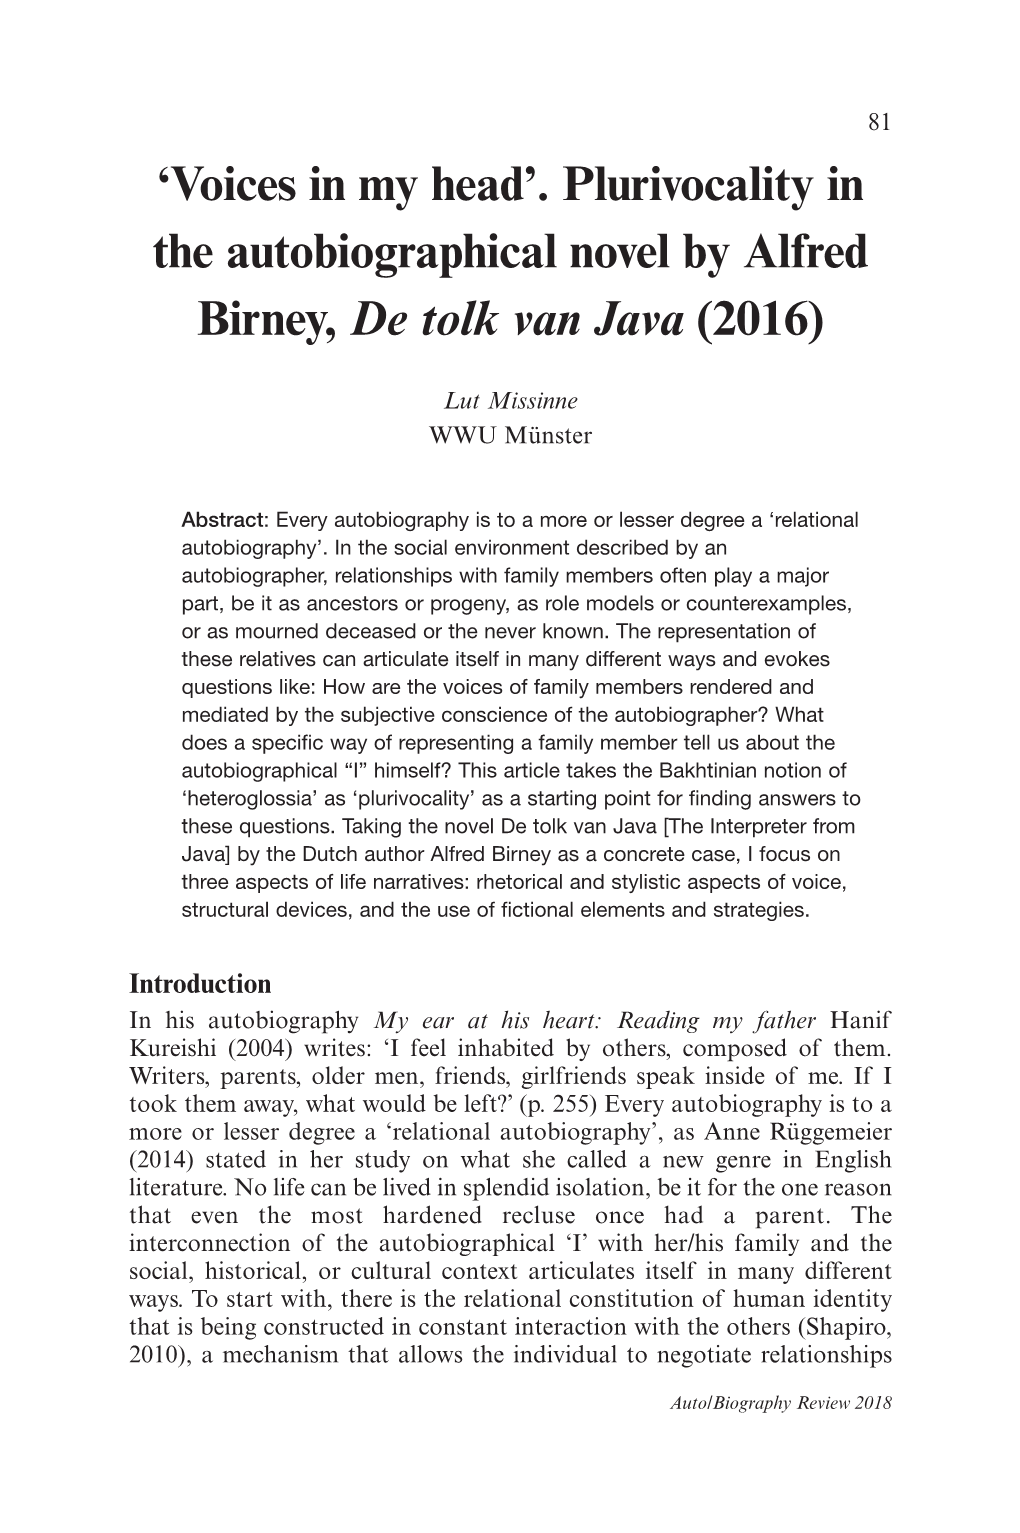 'Voices in My Head'. Plurivocality in the Autobiographical Novel by Alfred Birney, De Tolk Van Java (2016)